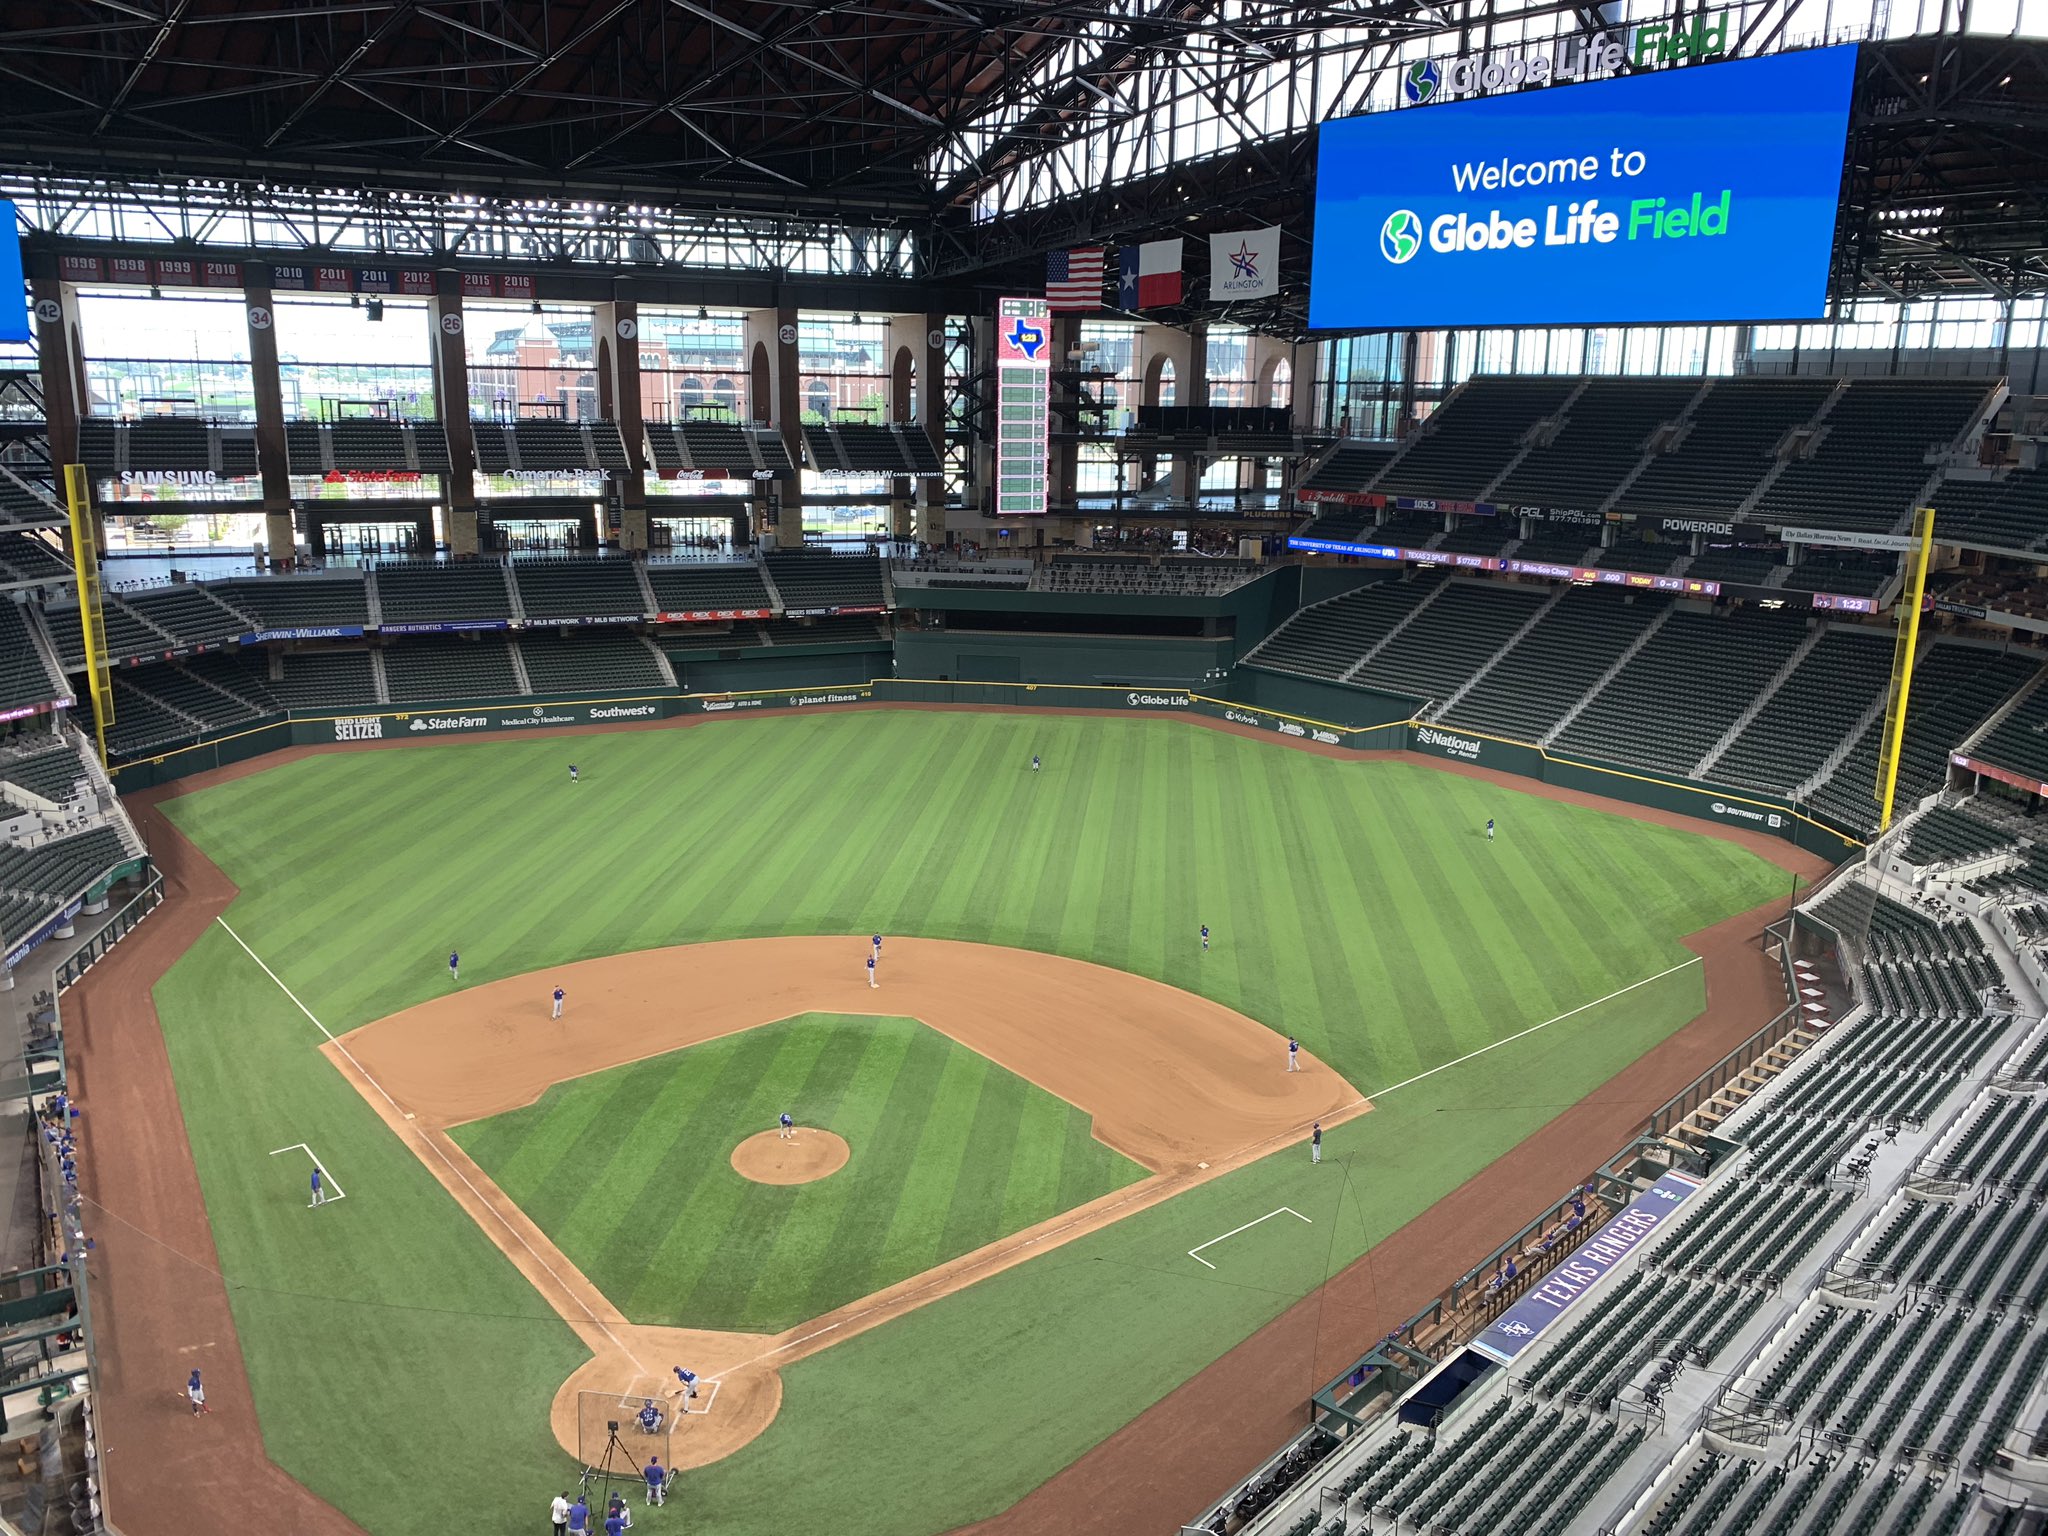 Globe Life Field sits empty, but Arlington and the Rangers are on